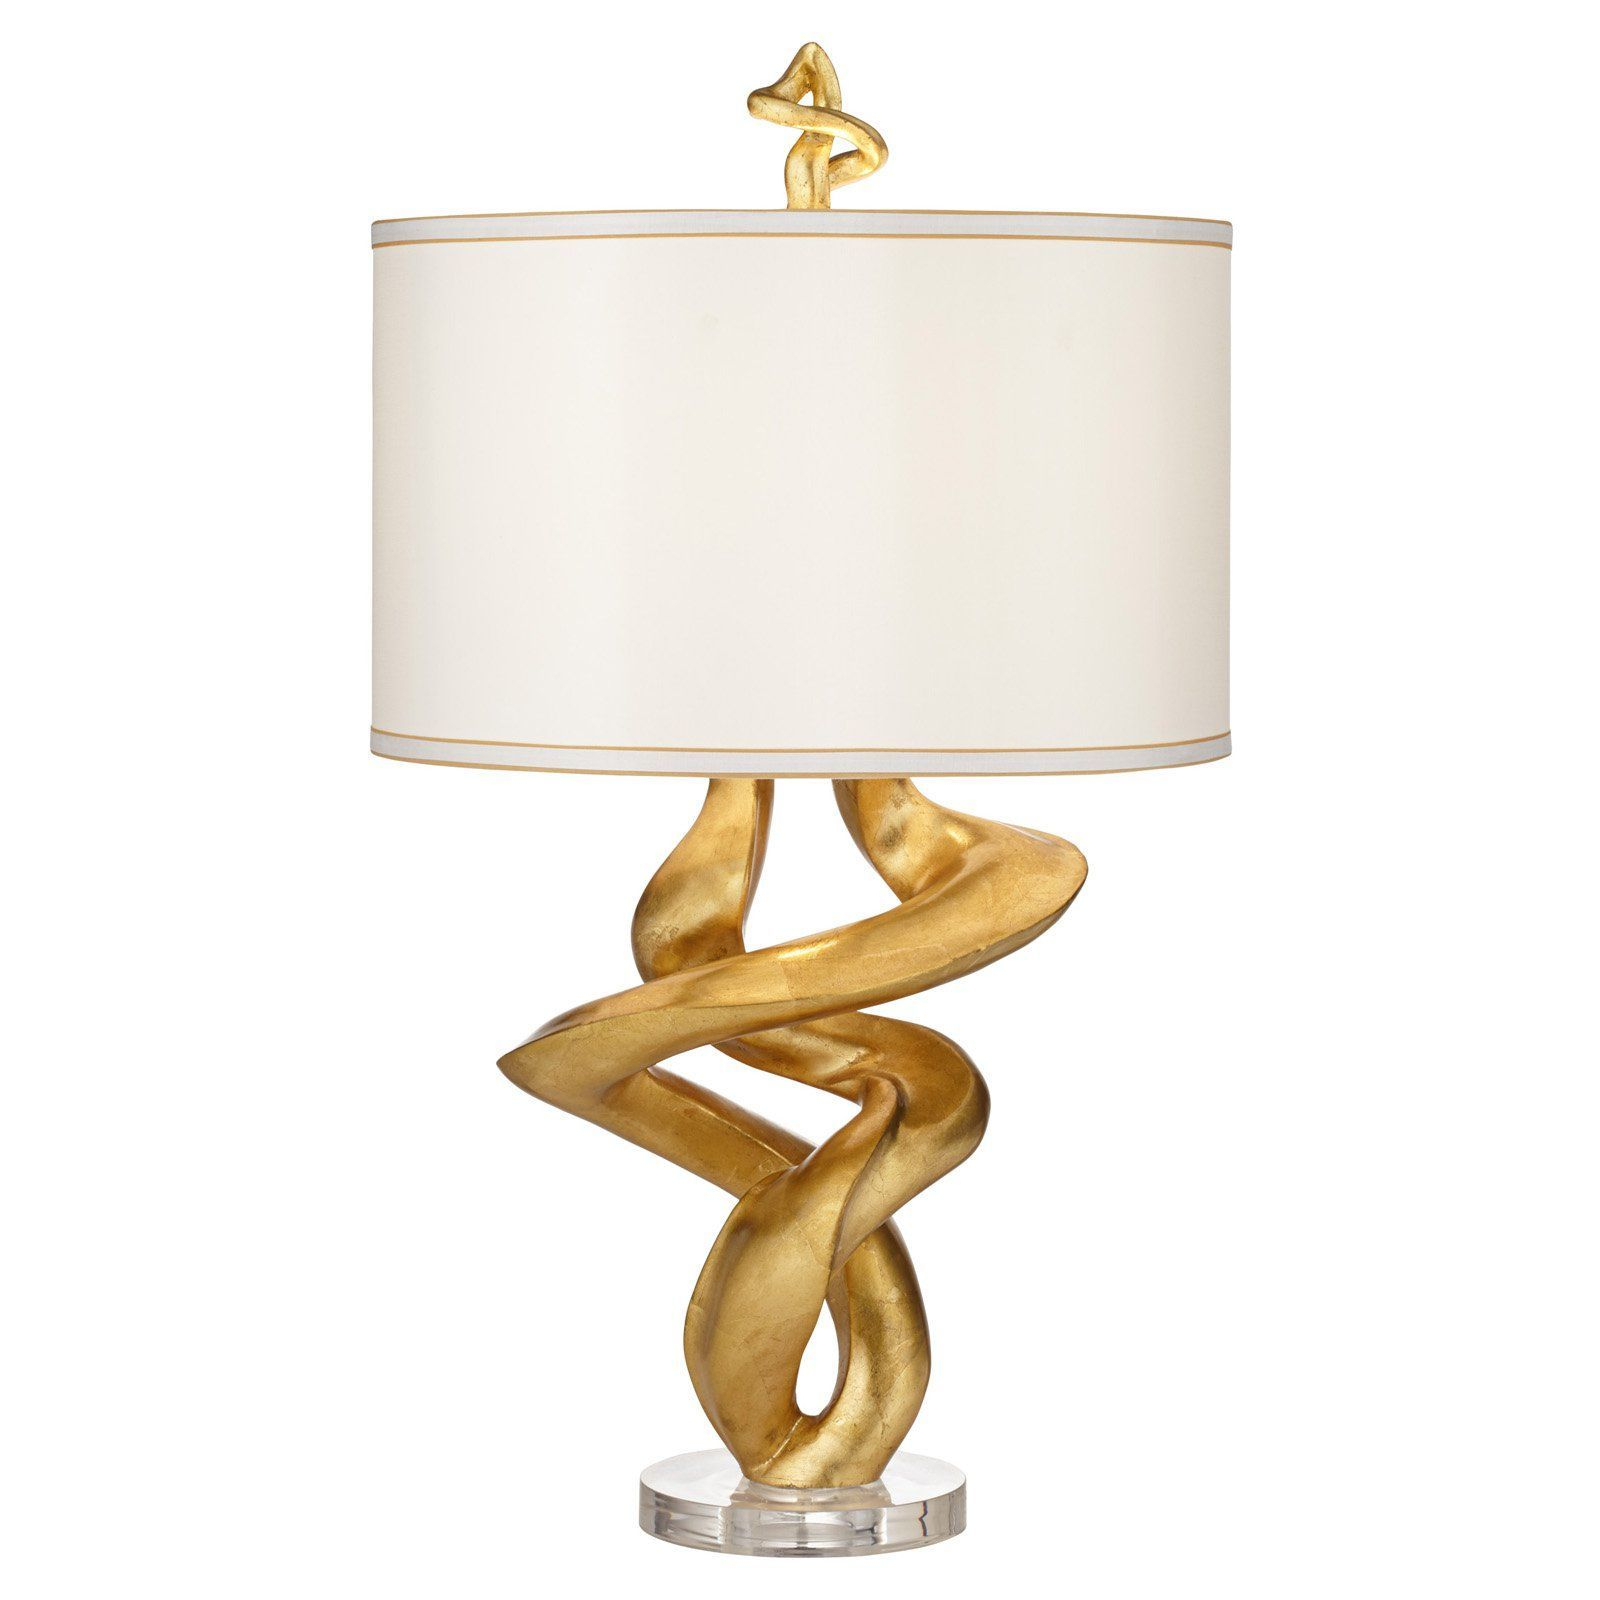 Kathy Ireland Tribal Impressions Gold Table Lamp 87 6026a within sizing 1600 X 1600